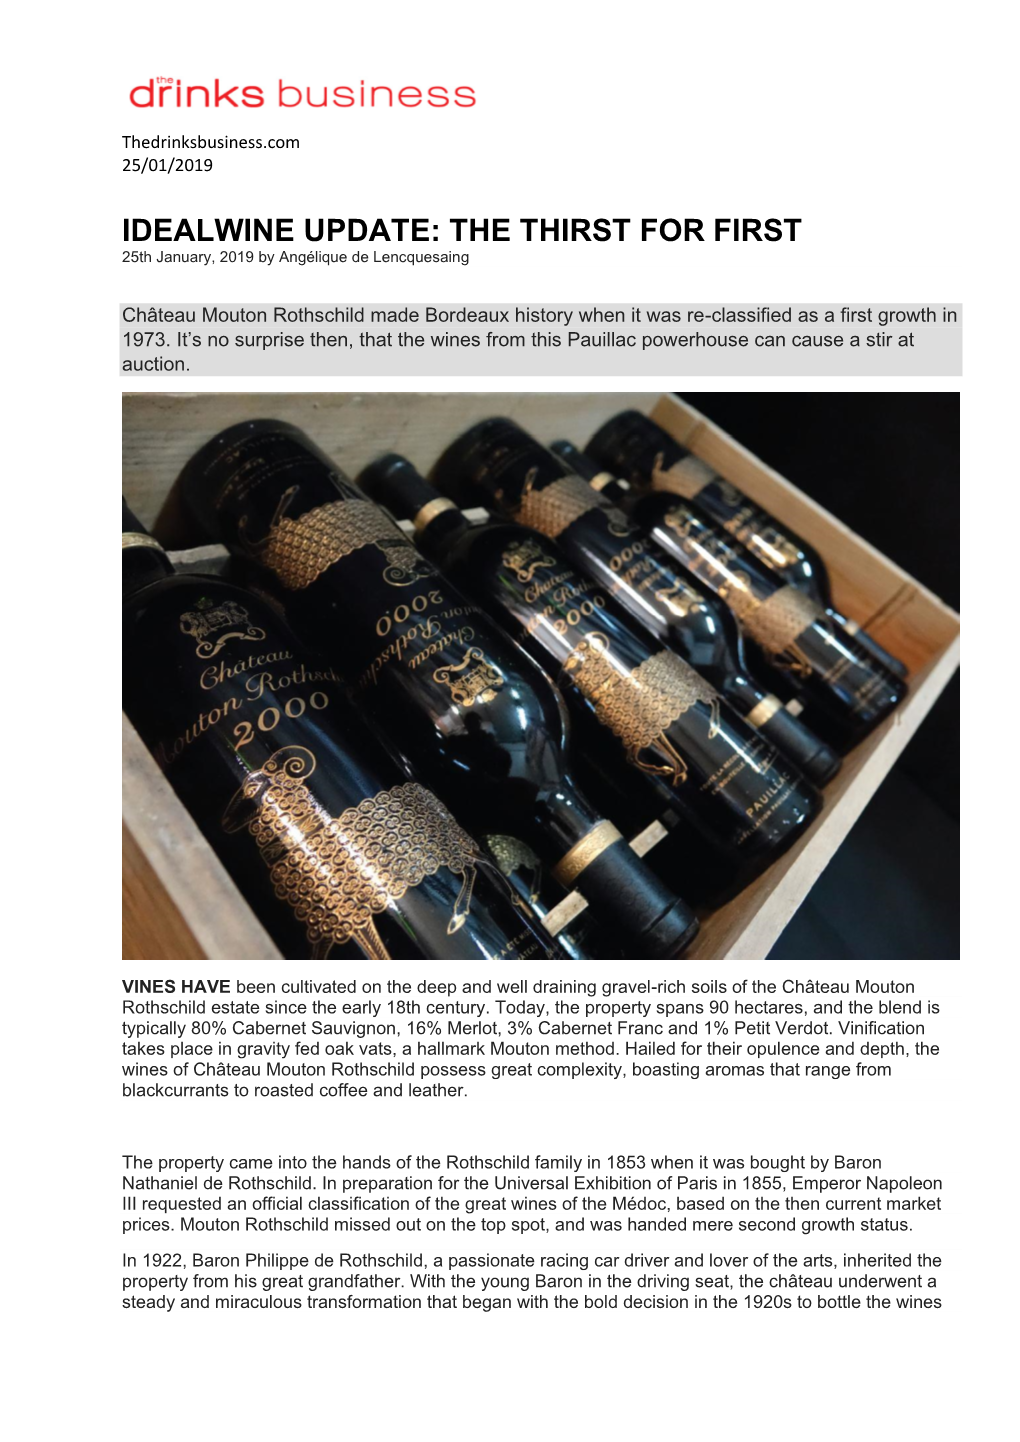 IDEALWINE UPDATE: the THIRST for FIRST 25Th January, 2019 by Angélique De Lencquesaing